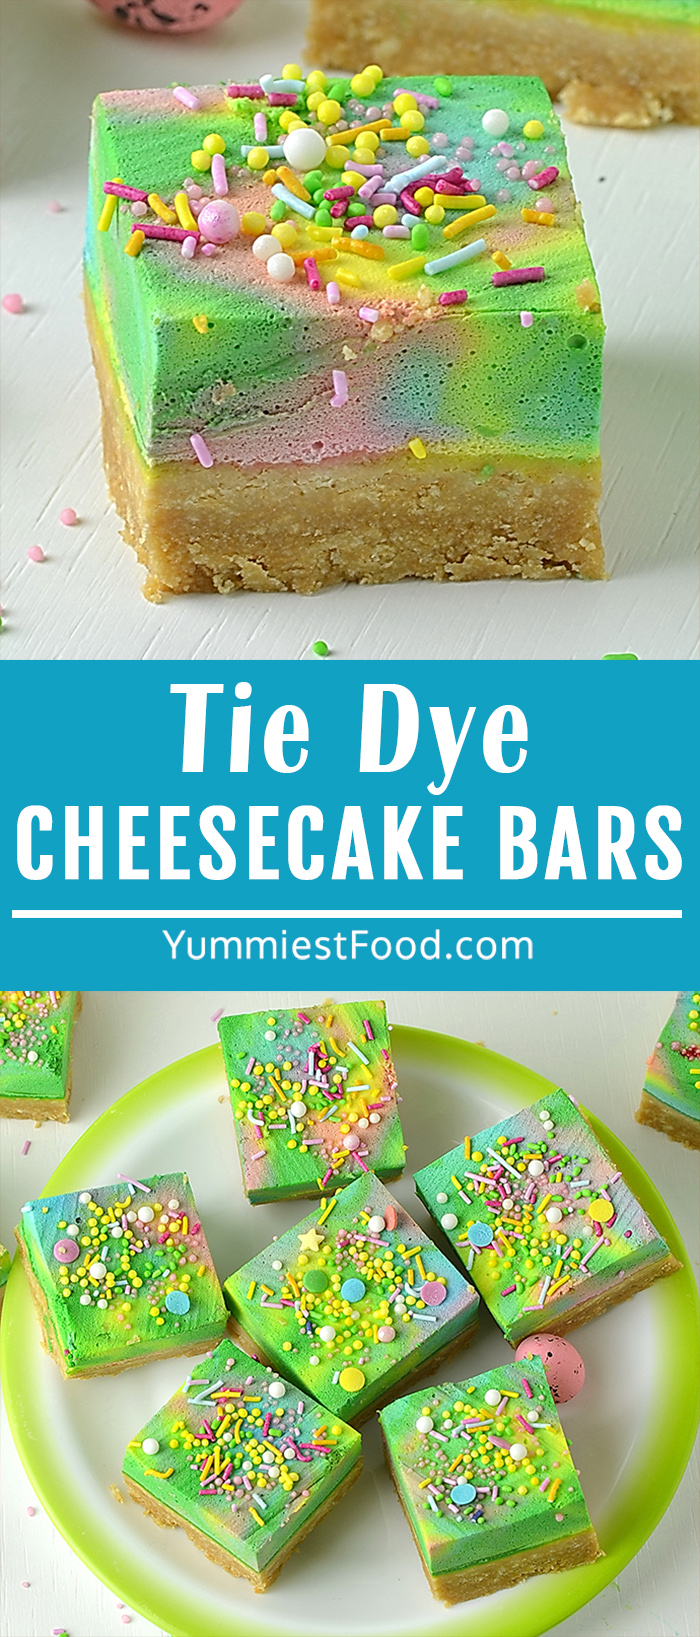 Tie Dye Cheesecake Bars are a great and colorful dessert. This is so fun and unique!